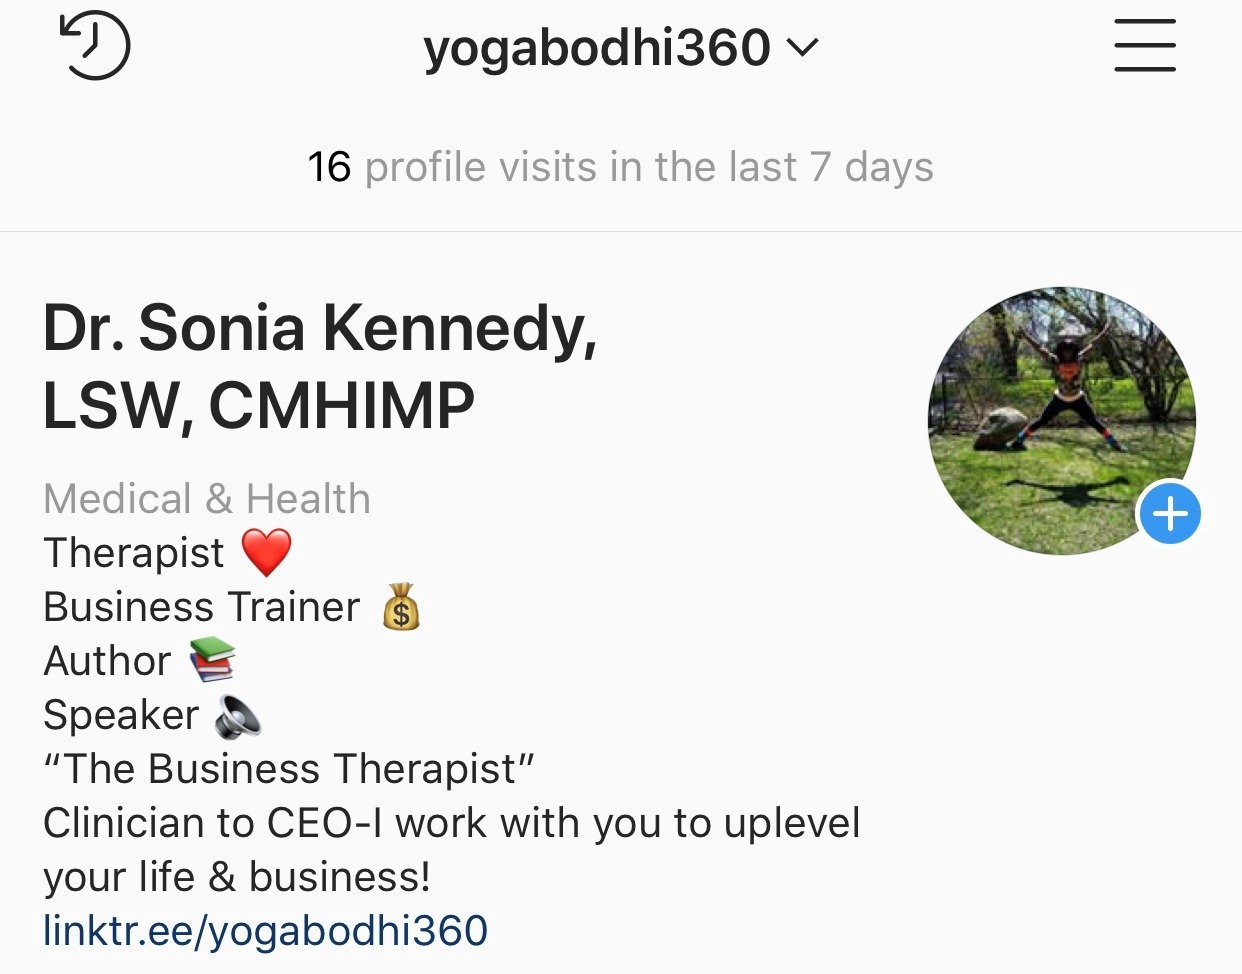 Gallery Photo of Follow Me on Instagram for Therapy & Lifestyle Management Tips & Tools @yogabodhi360